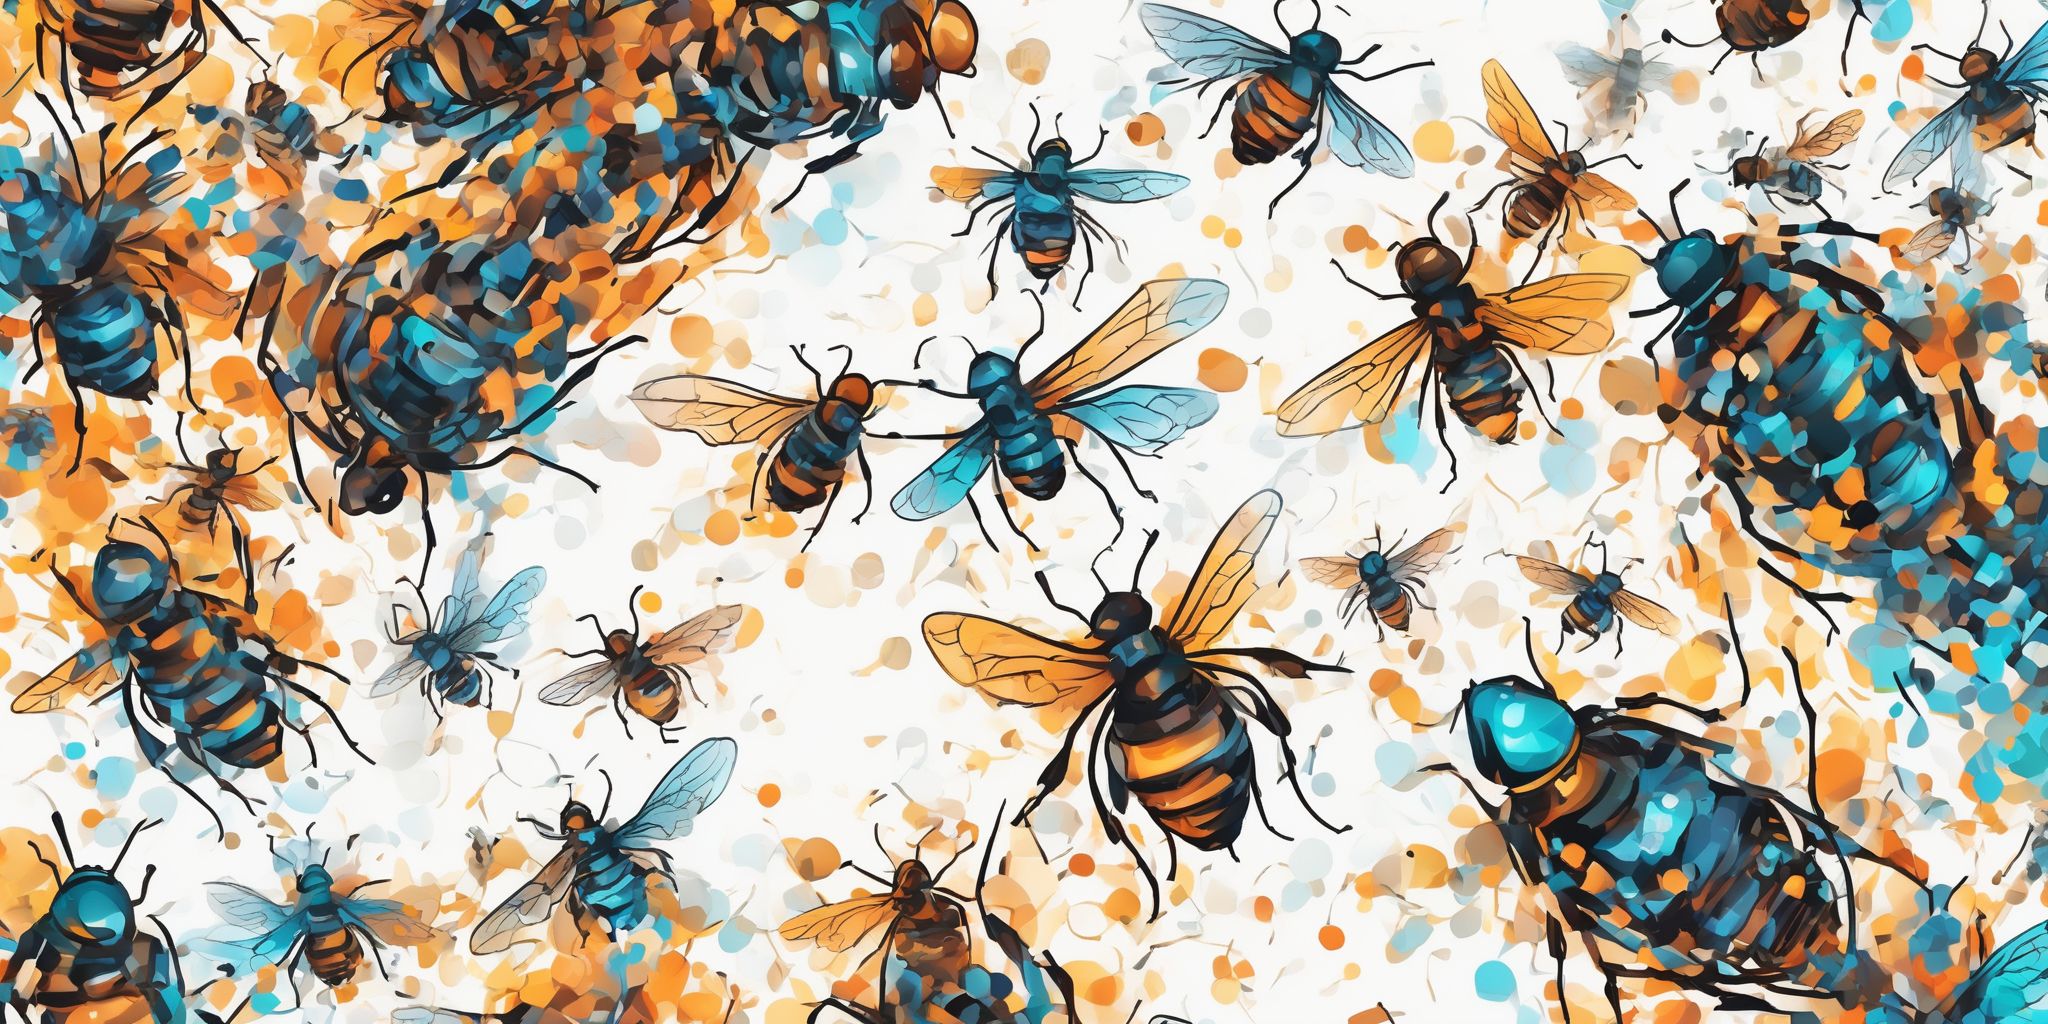 Digital swarm in illustration style with gradients and white background